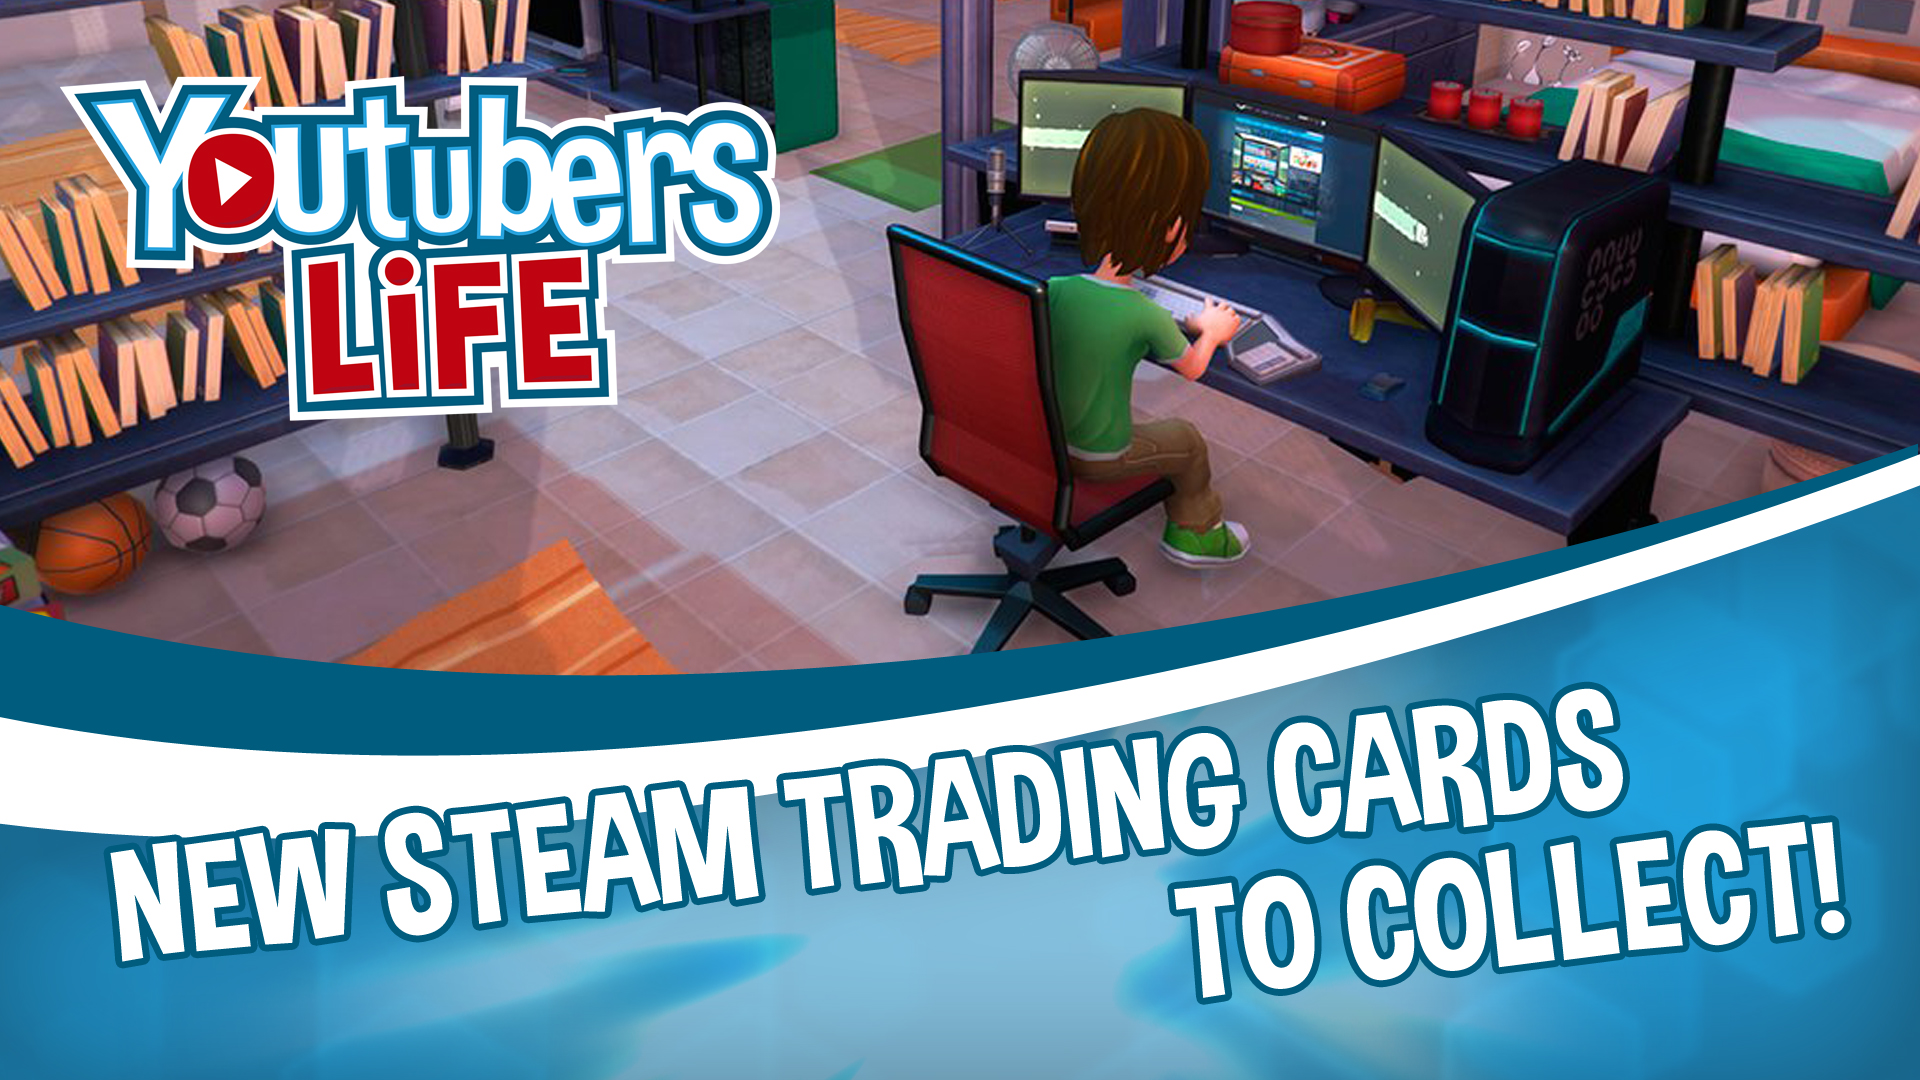 youtubers life free online play